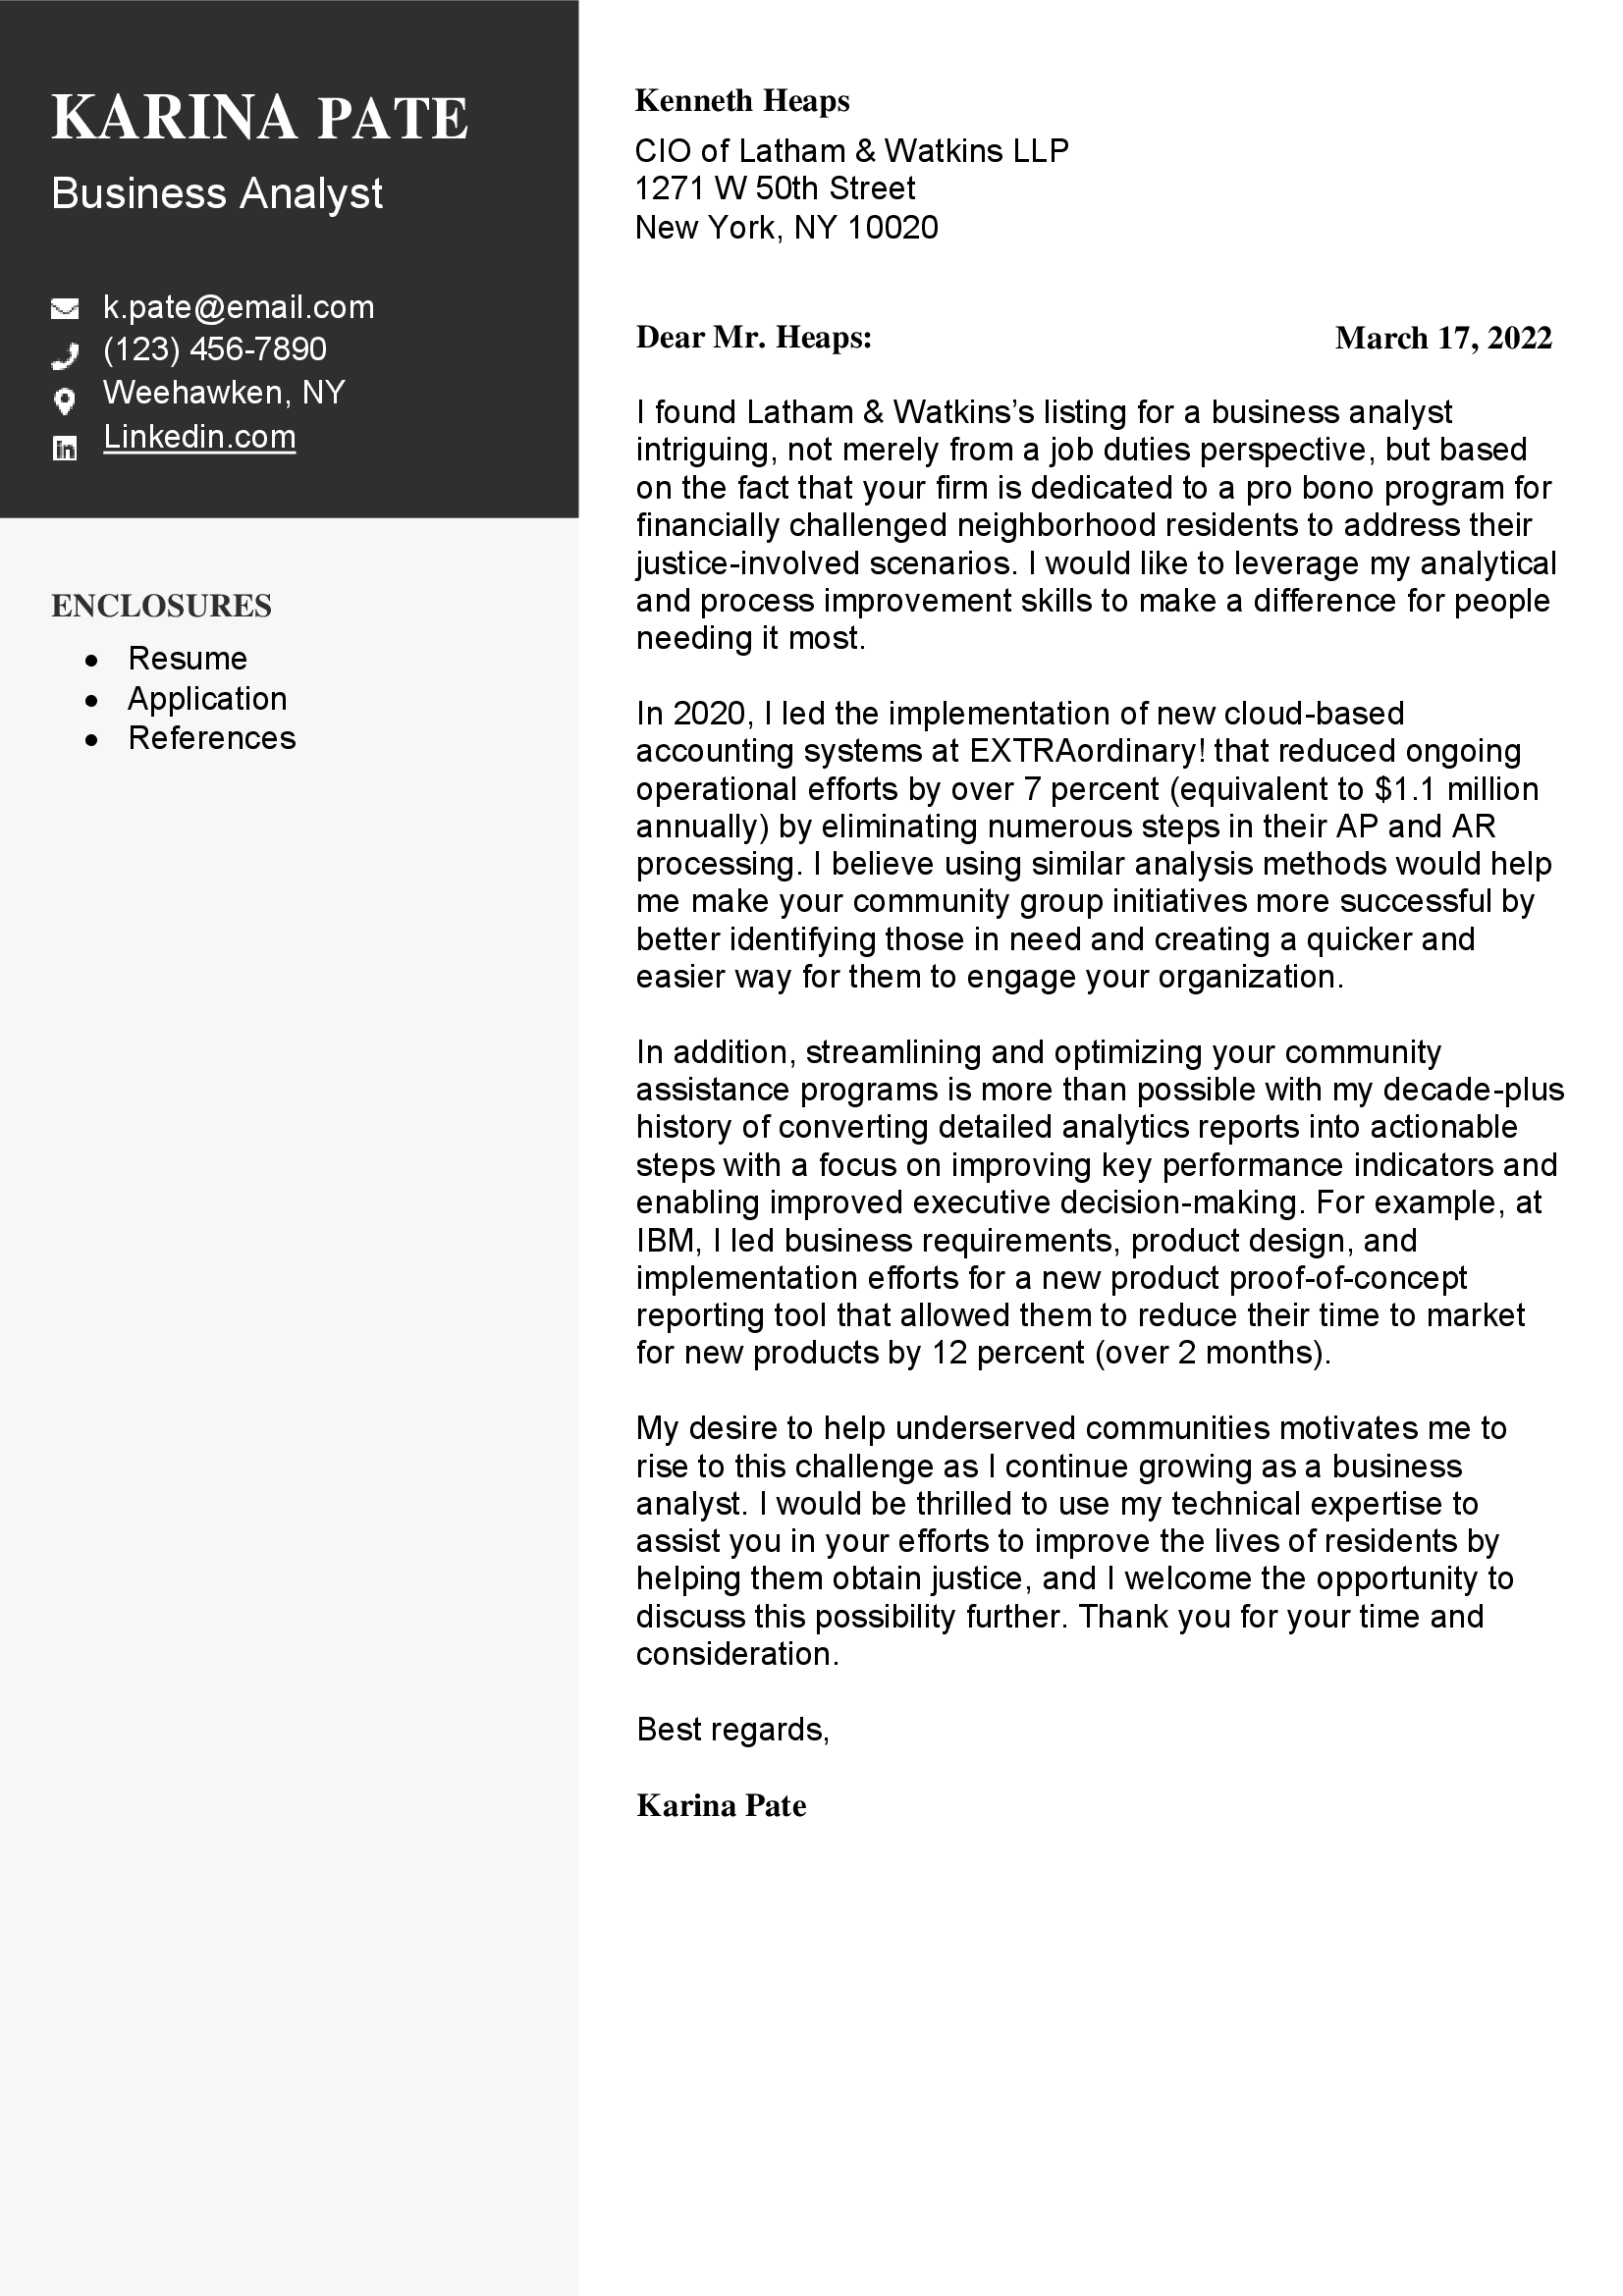 Business analyst cover letter with black contact header